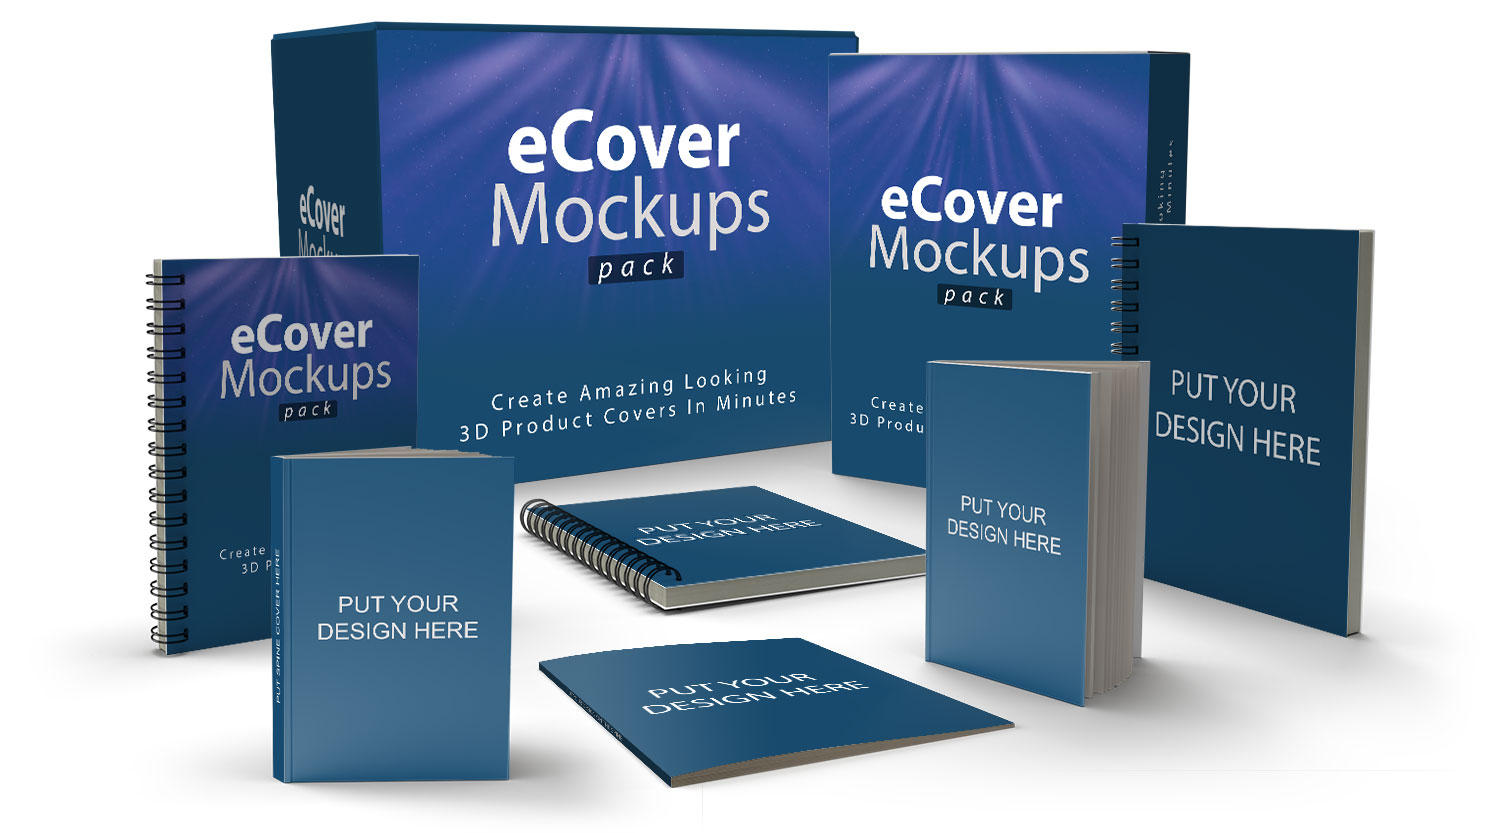 ECover Software - eCover Mockups Pack